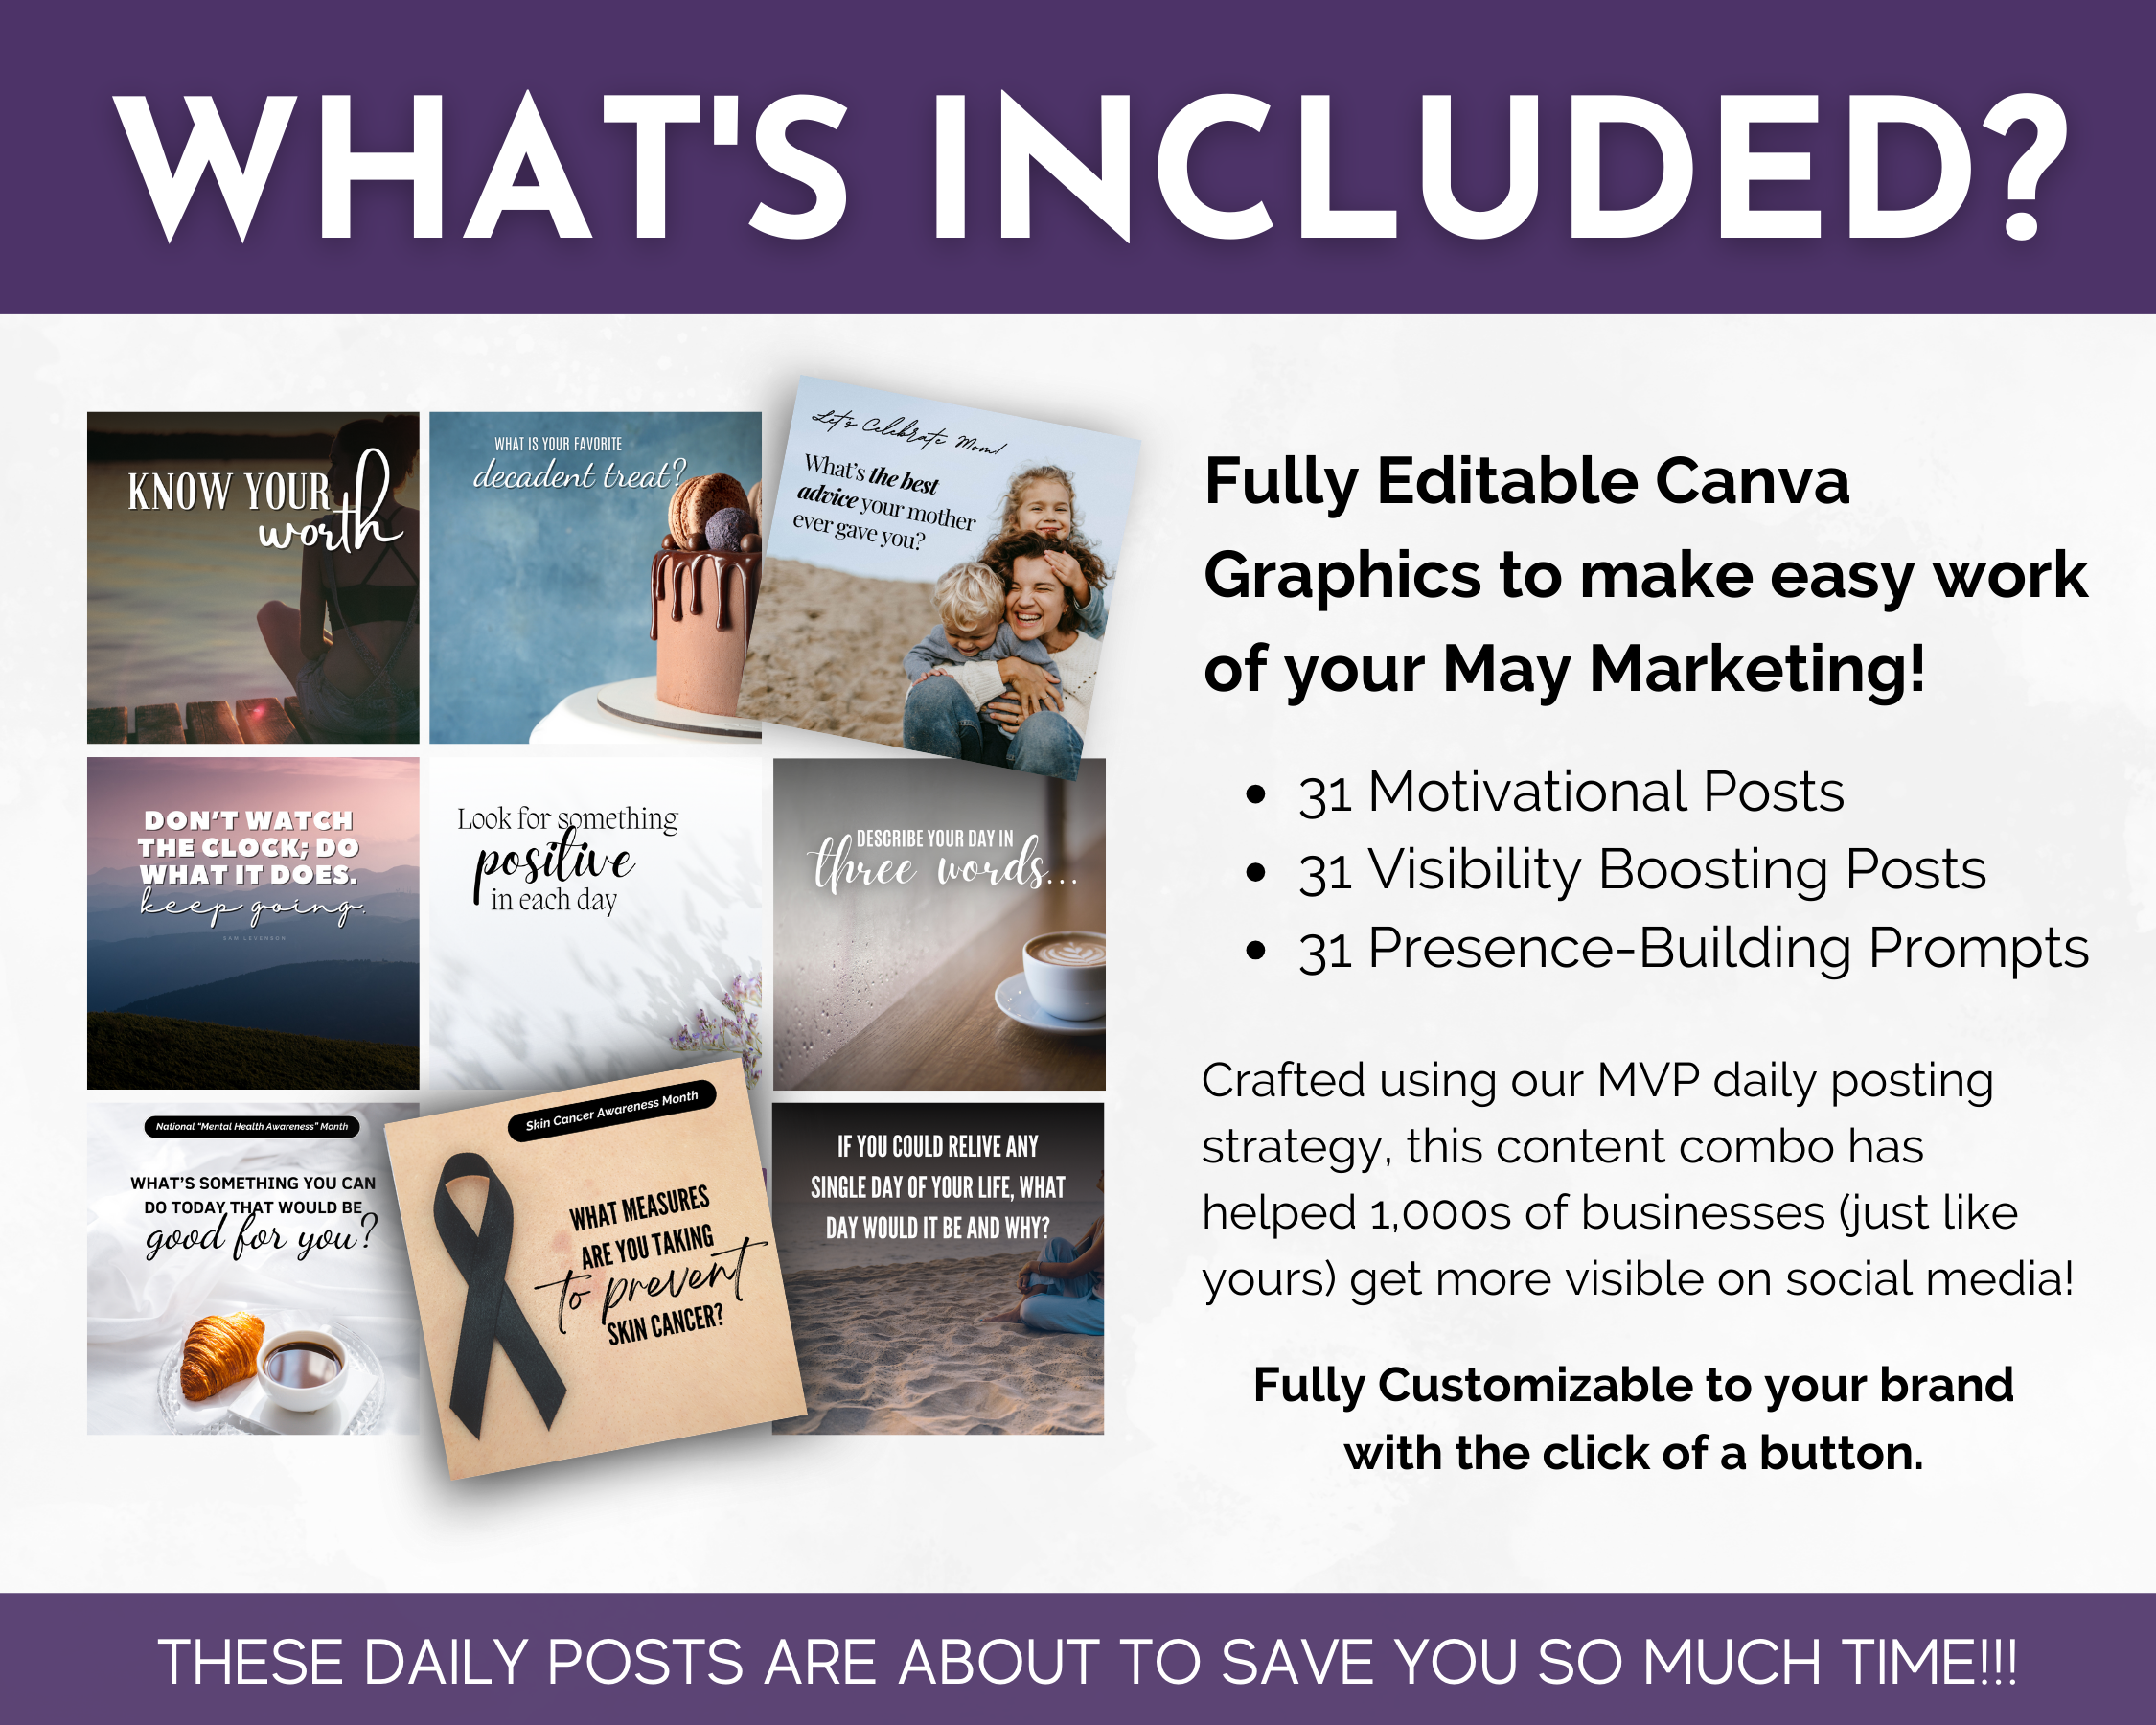 Promotional graphic showcasing the May Daily Posting Plan - Your Social Plan with editable Canva templates and daily post suggestions for April, aimed at boosting engagement growth from Get Socially Inclined.